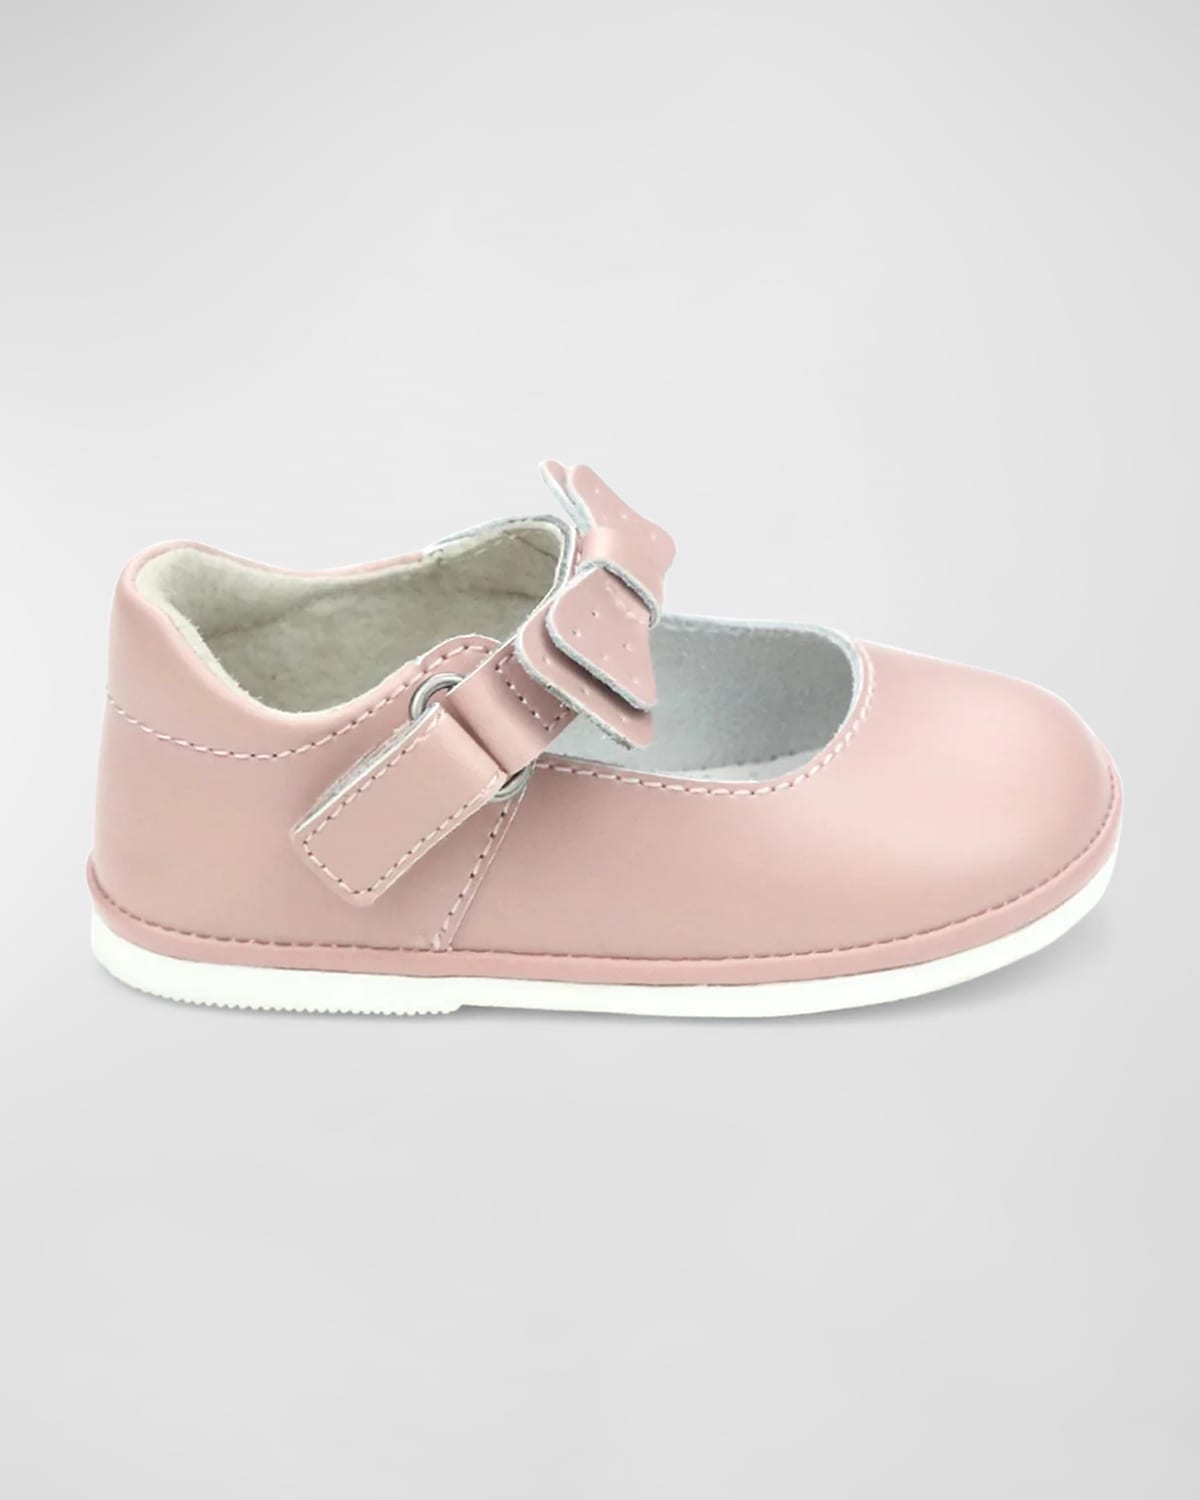 L'amour Shoes Kids' Girl's Ava Bow-strap Mary Jane Flats, Baby In Dusty Pink